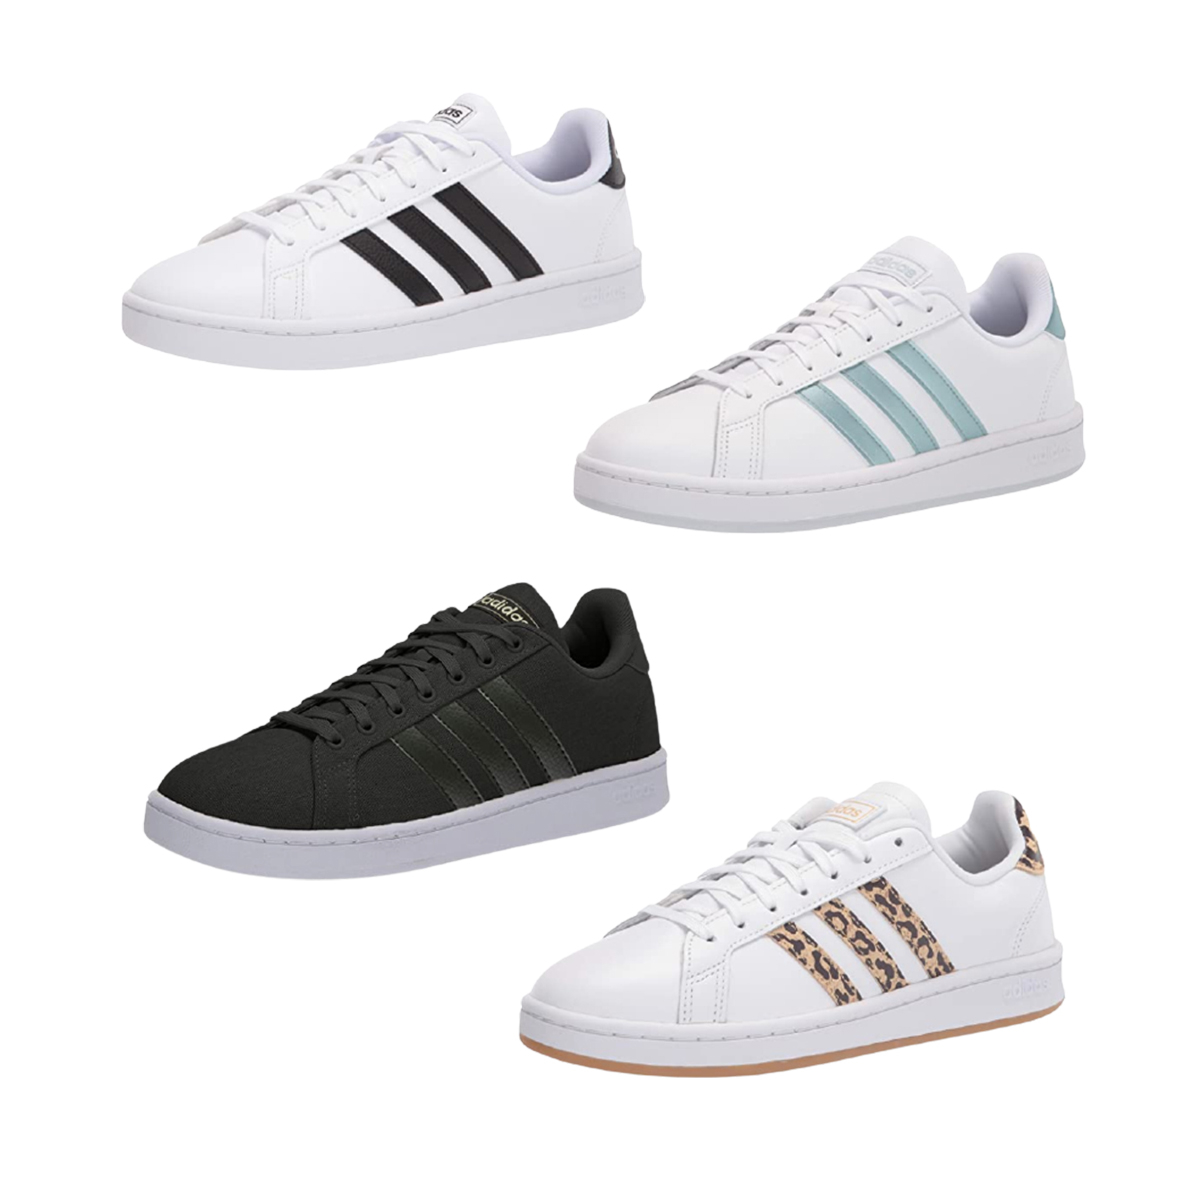 Bestselling Adidas Sneakers $37? Shop This Amazon Sale Now! - E! Online